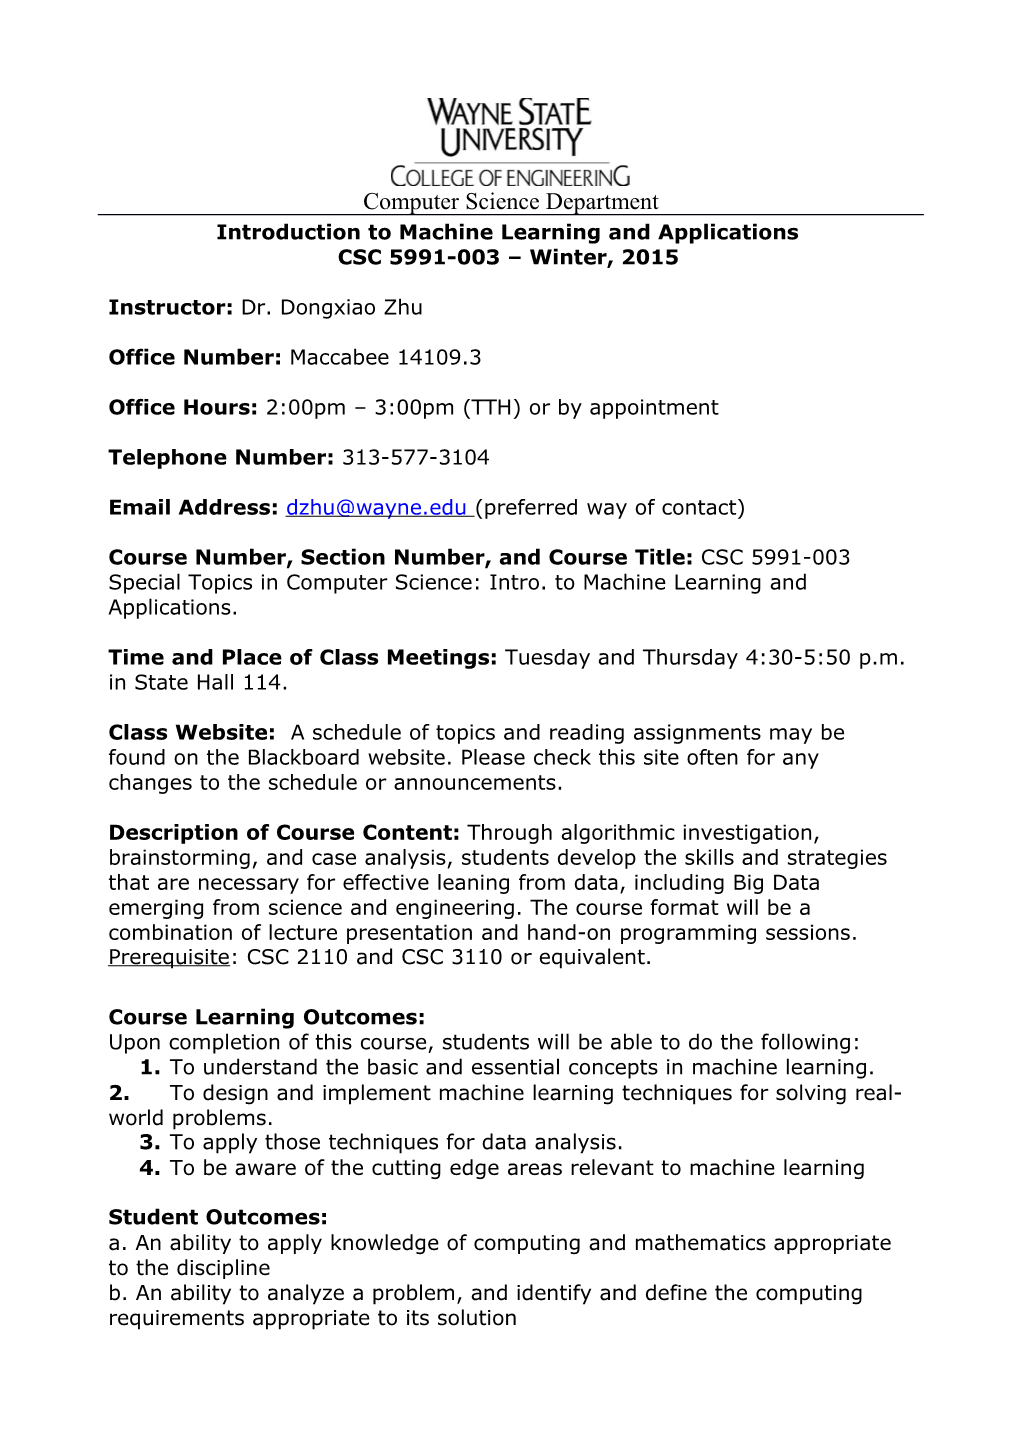 Introduction to Machine Learning and Applications CSC 5991-003 Winter, 2015